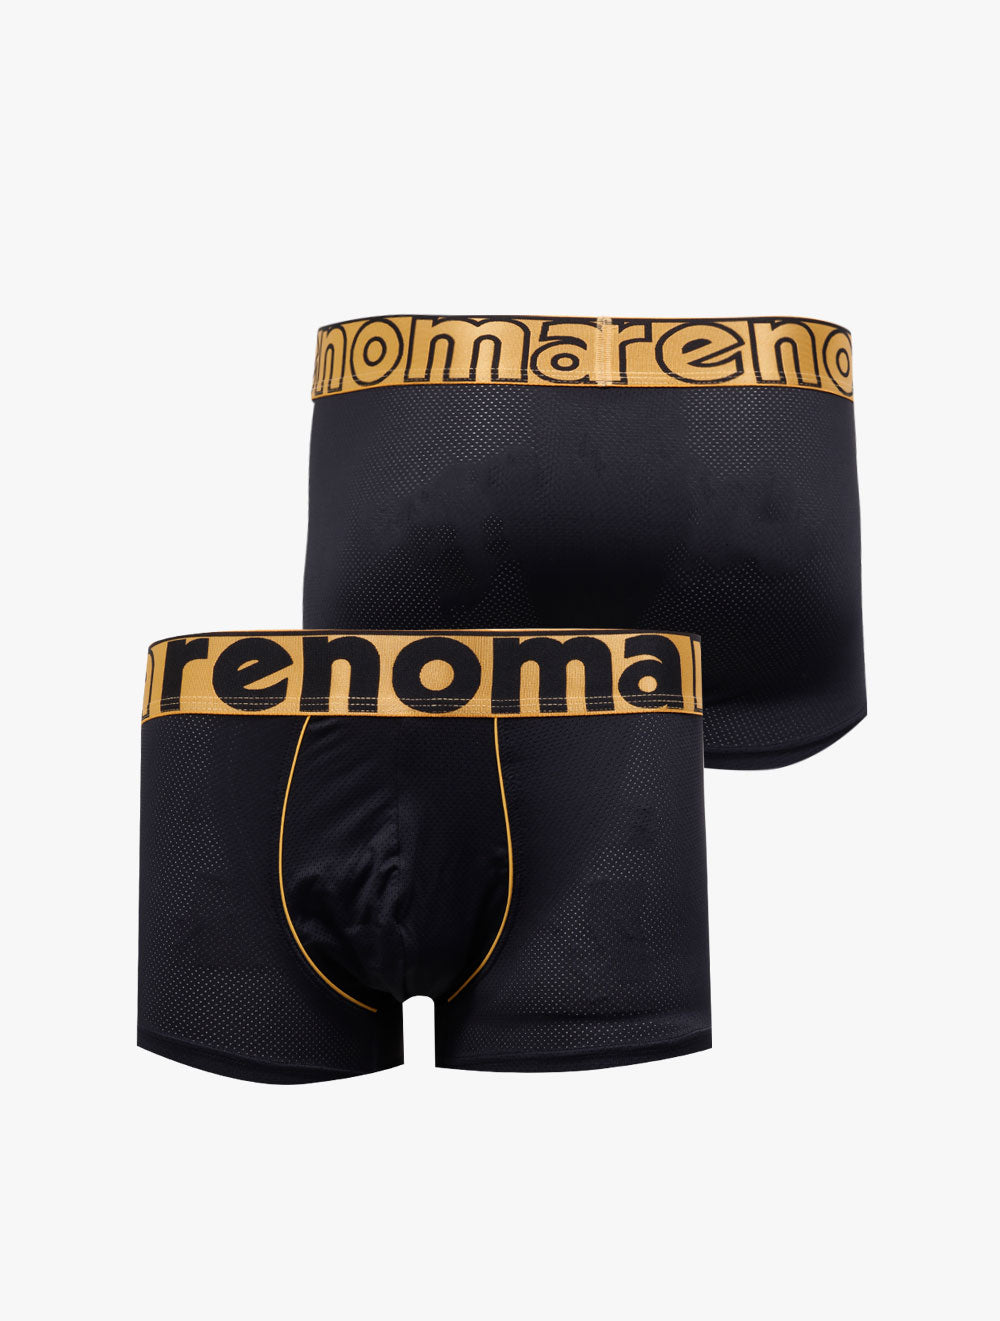 RENOMA
Recharge Trunk Brief 1in1 - 8011